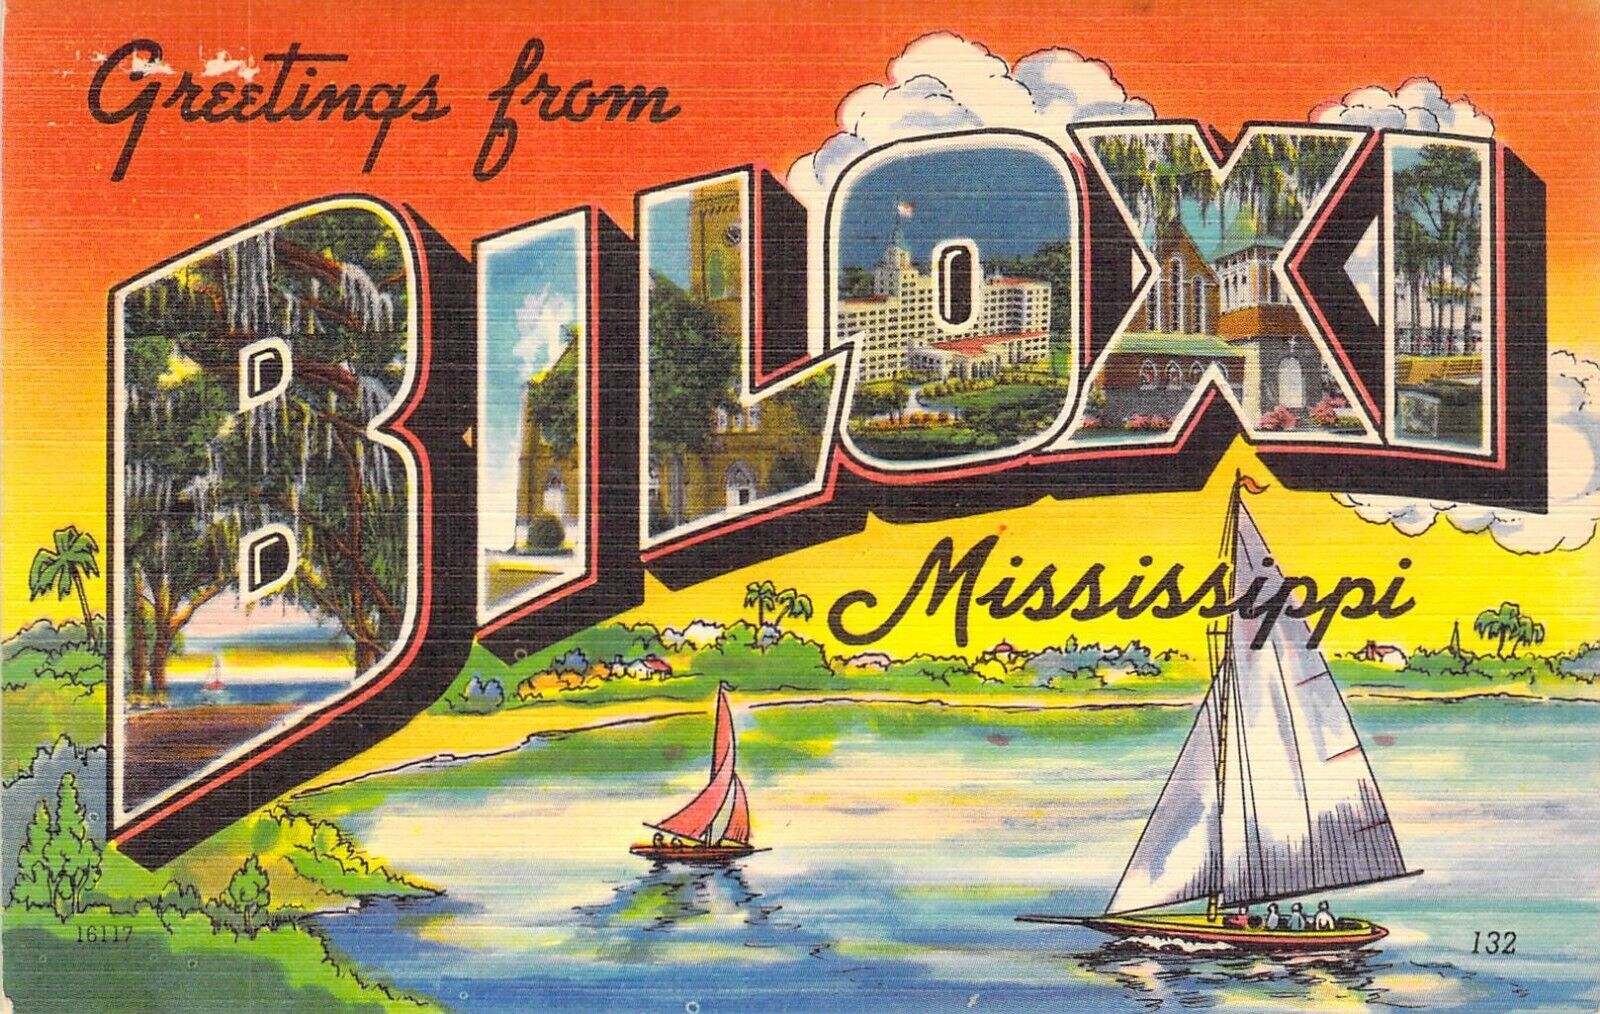 MS BIloxi Greetings from #132 Colourpicture Large Letter LLL postcard D7